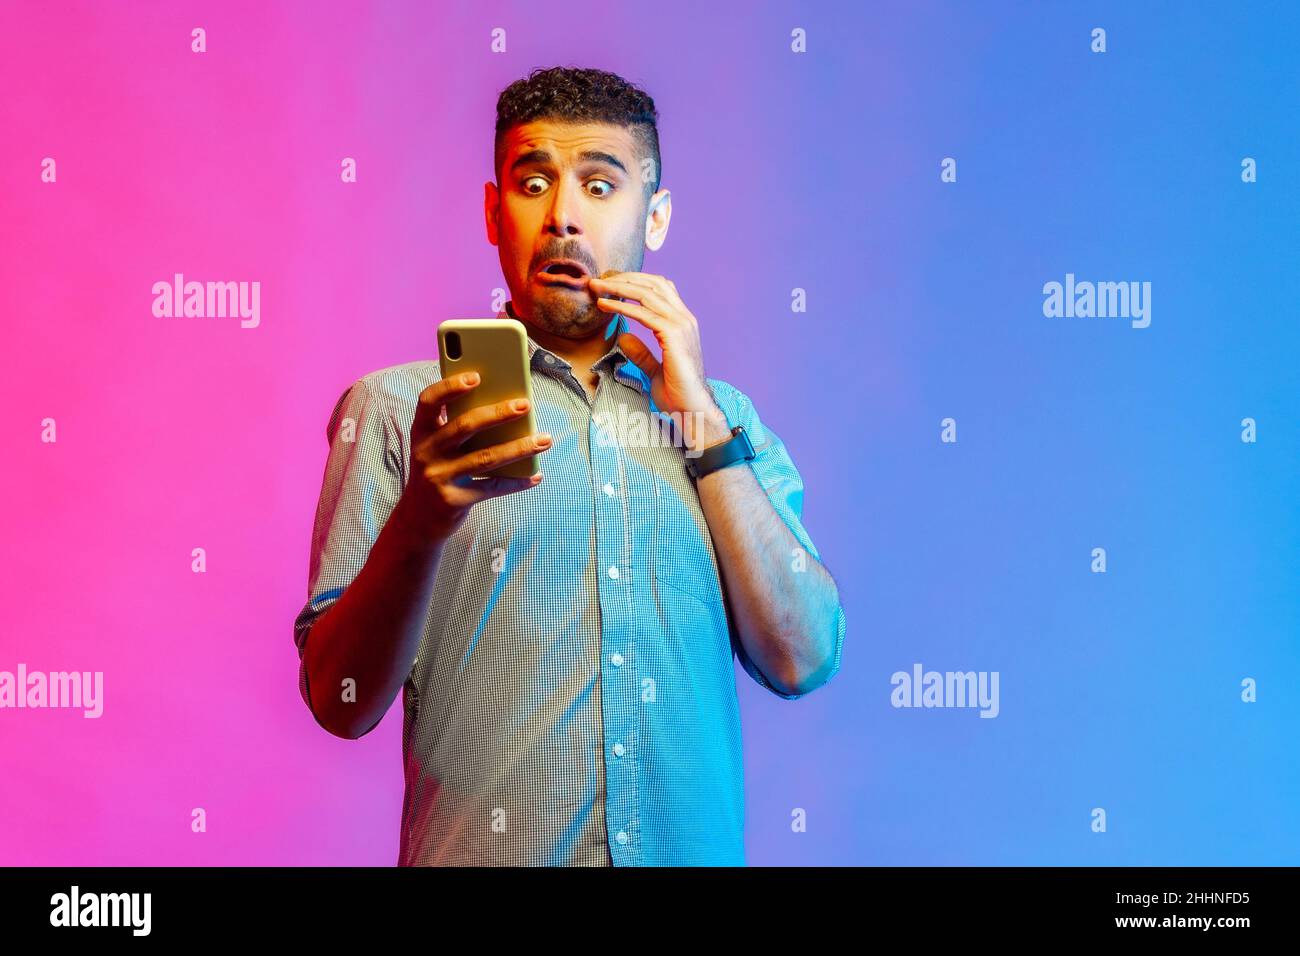 Portrait of man in shirt looking at smartphone display with funny scared face, shocked and surprised with application. Indoor studio shot isolated on colorful neon light background. Stock Photo